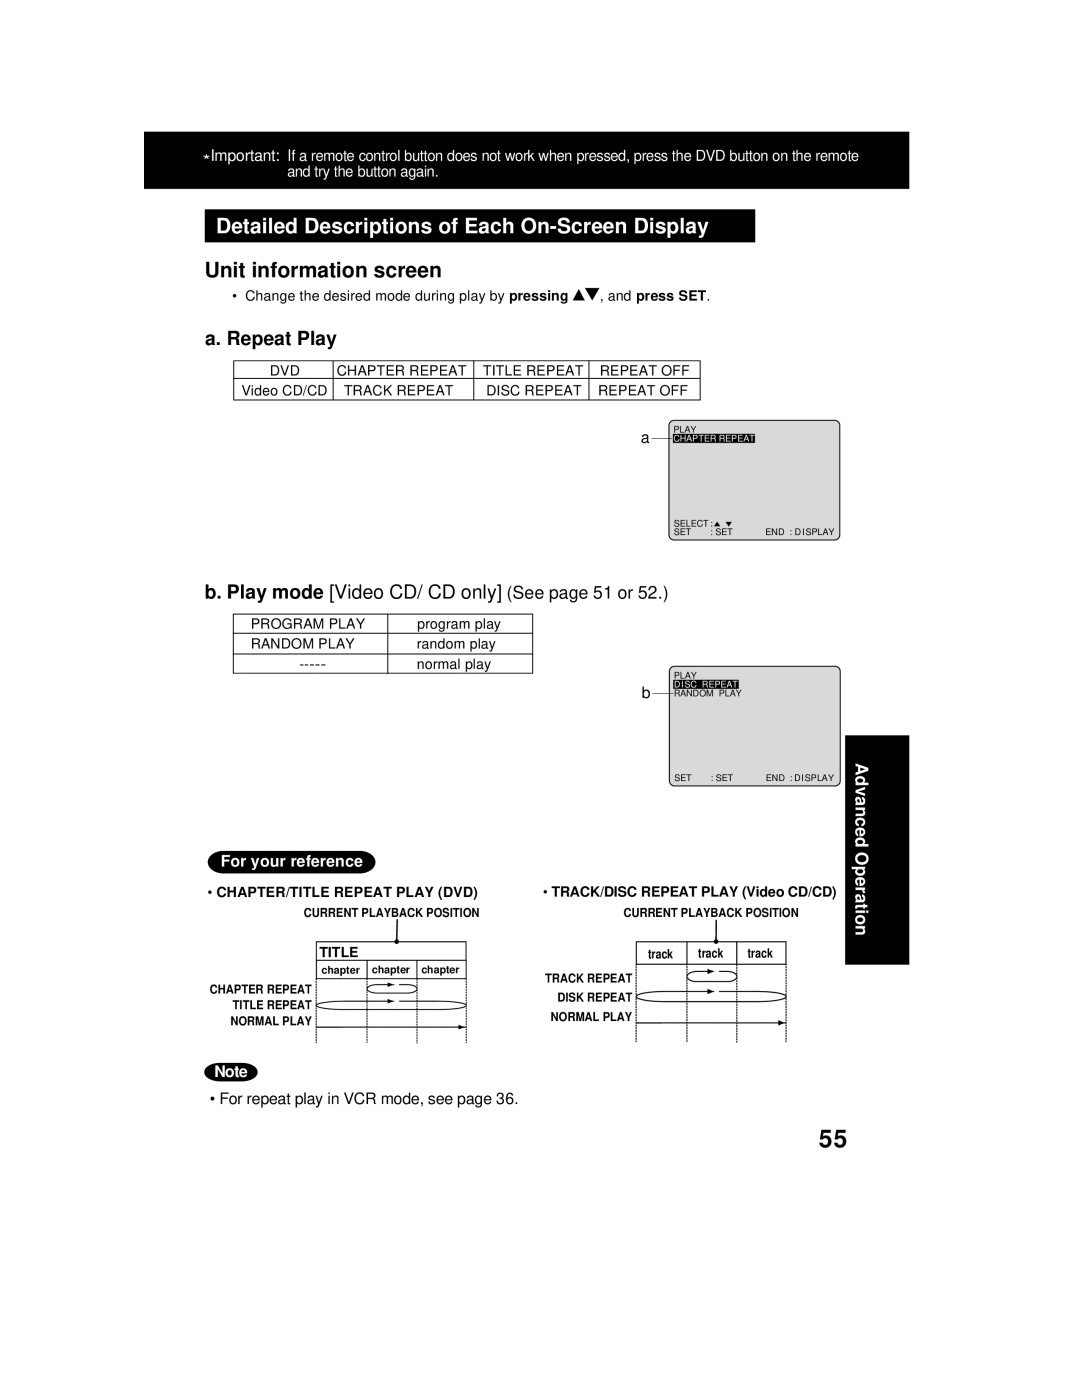 Panasonic AG 527DVDE manual Unit information screen, a. Repeat Play, b. Play mode Video CD/ CD only See page 51 or, Title 